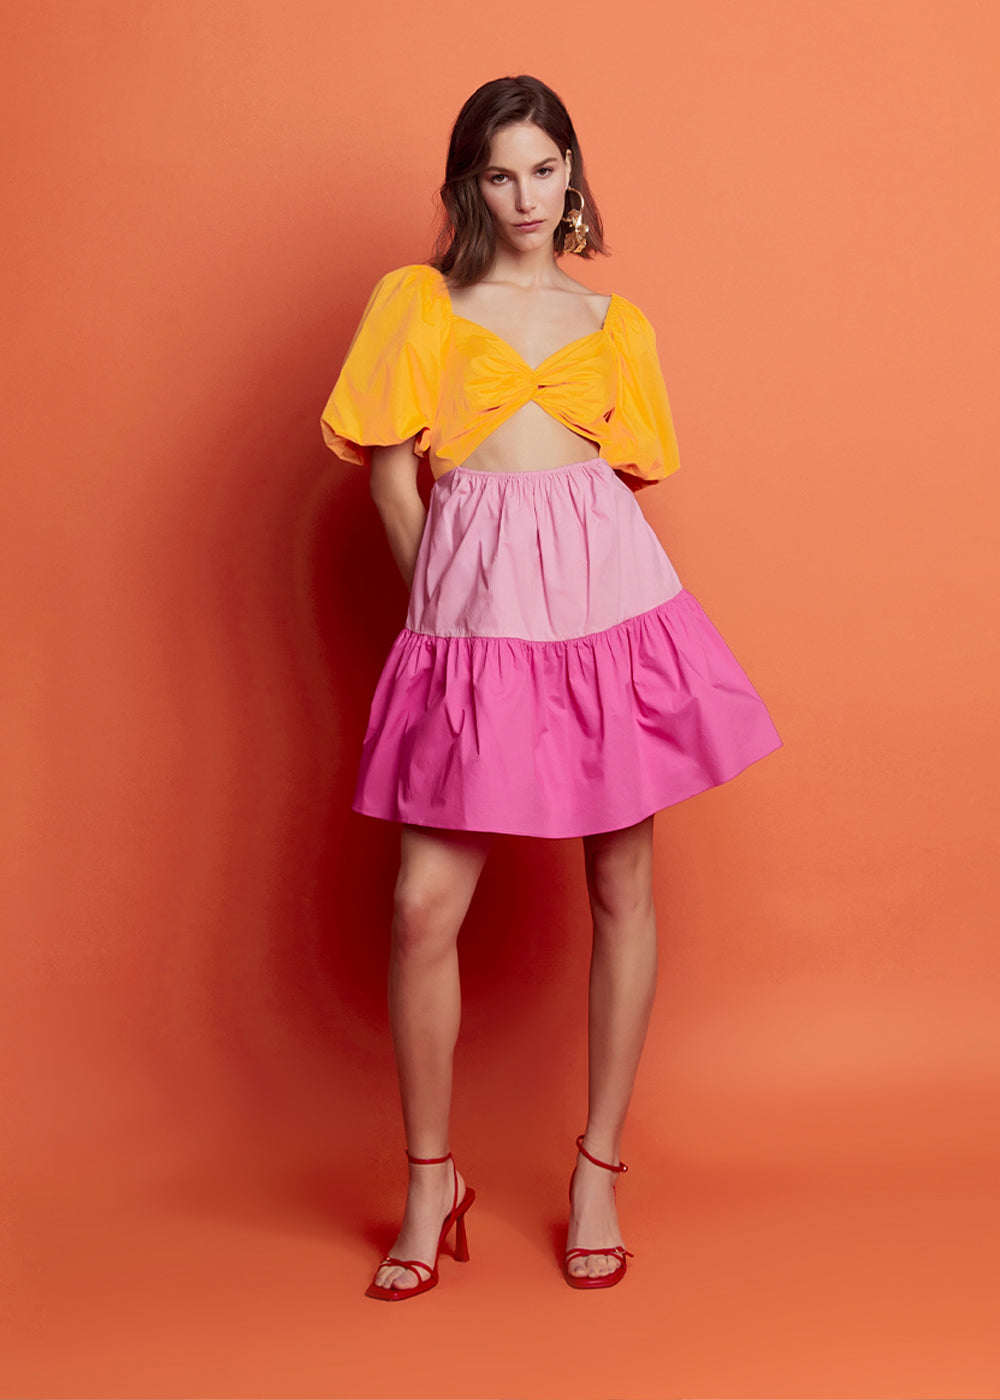 Discover ENGLISH FACTORY Floral Fantasy collection shop new arrivals chic spring styles in Women's Clothing at objectrare.com